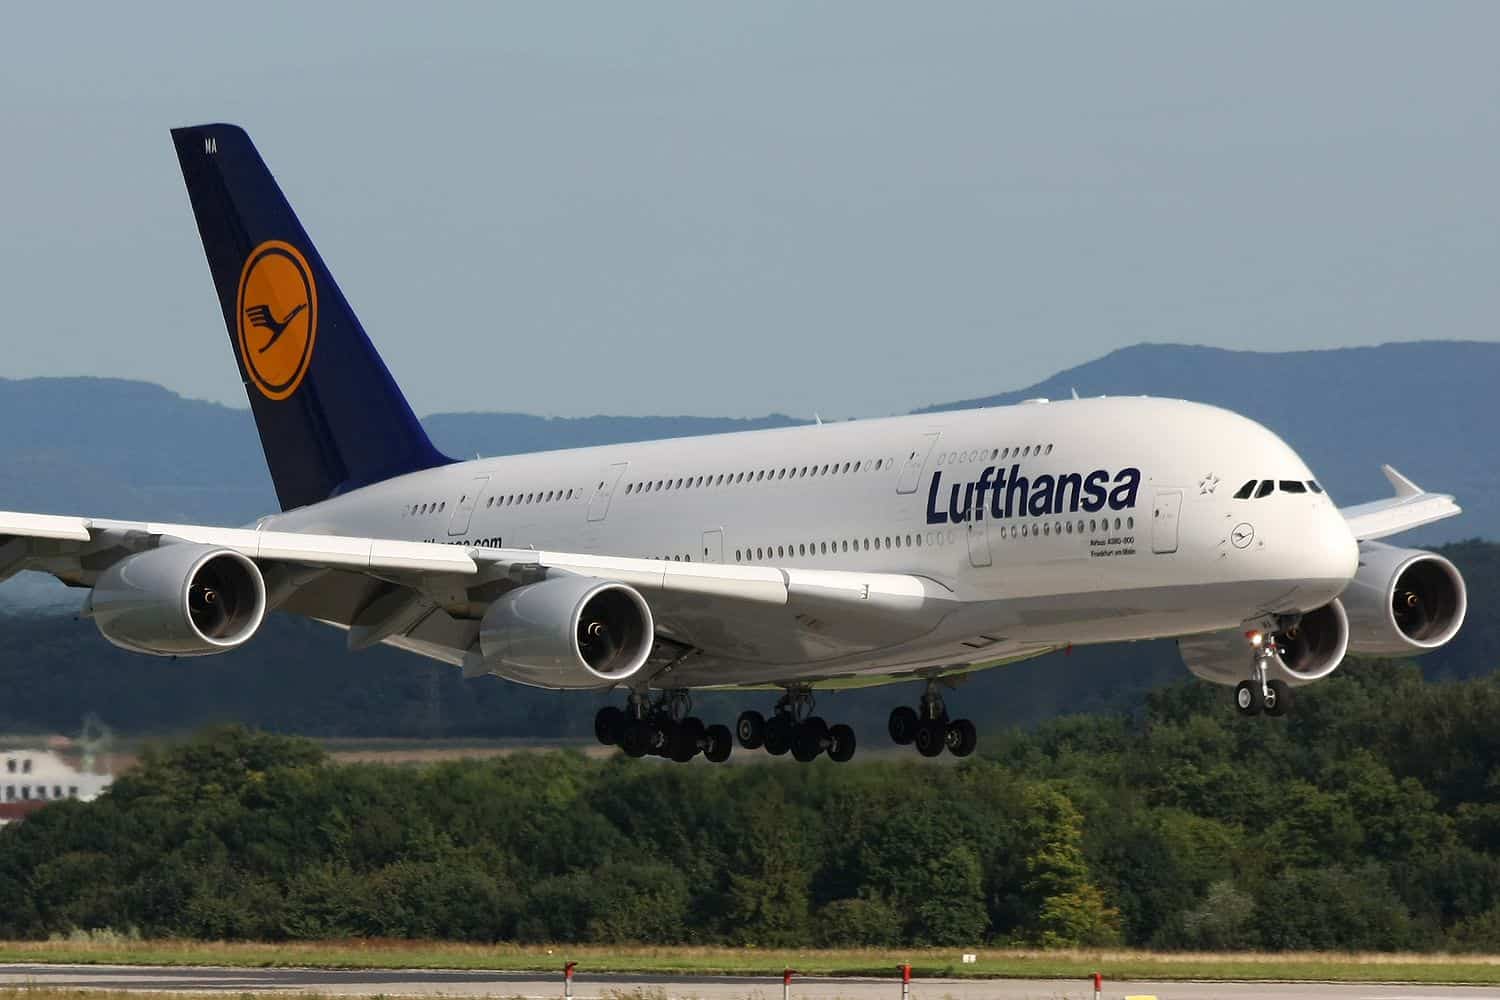 Europe resumes Zim direct flights after 11 years as Lufthansa jets into Victoria Falls